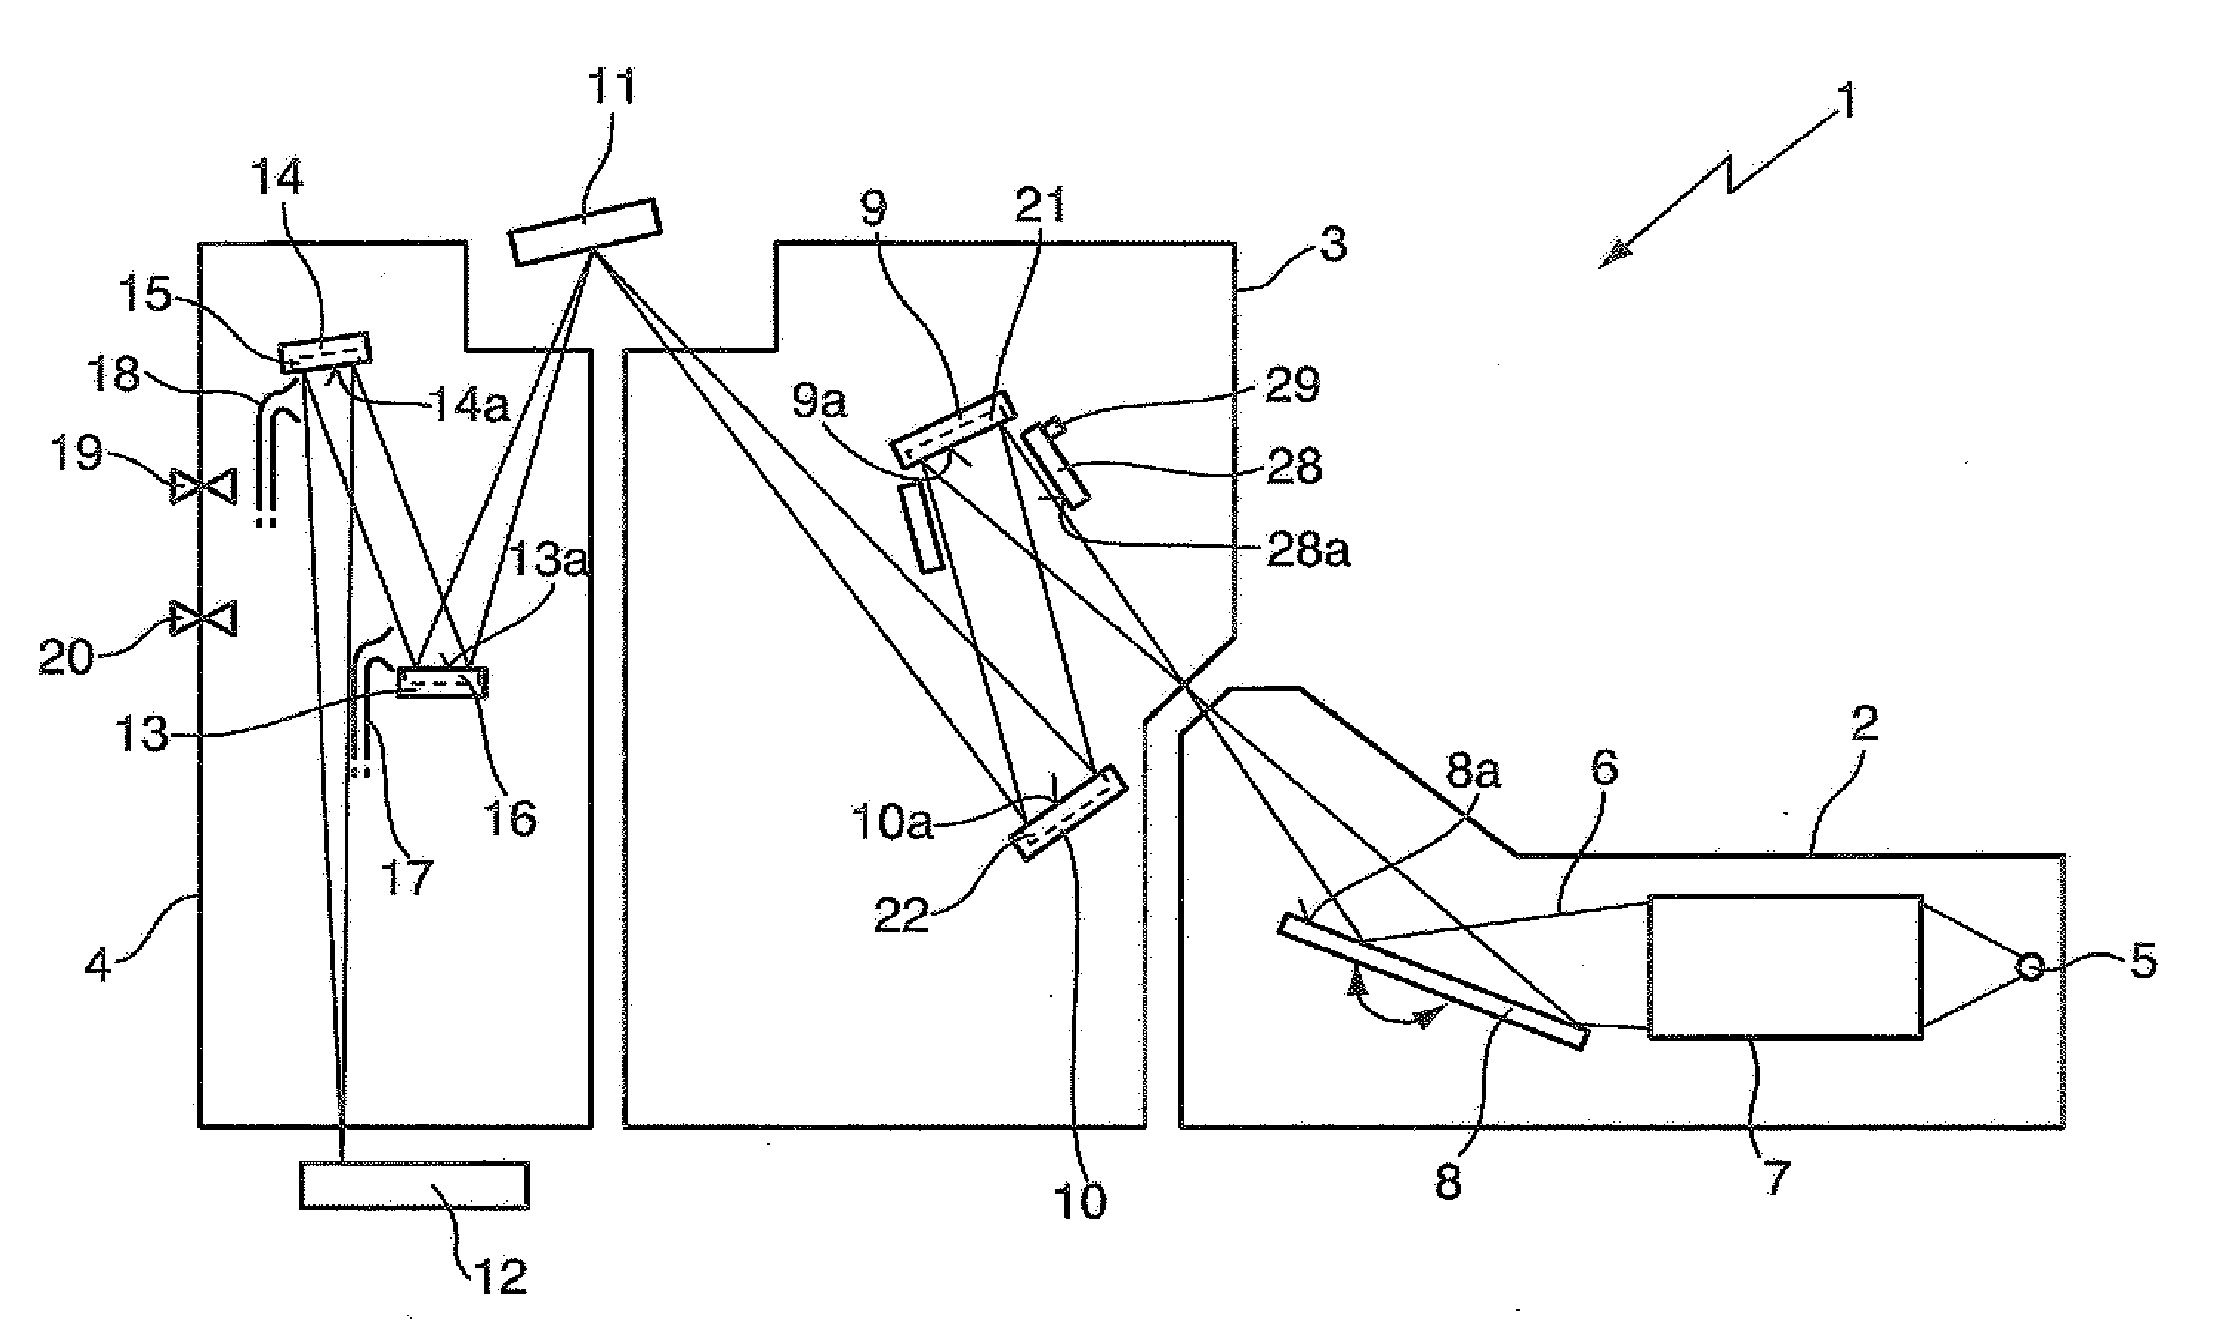 Optical arrangement and EUV lithography device with at least one heated optical element, operating methods, and methods for cleaning as well as for providing an optical element